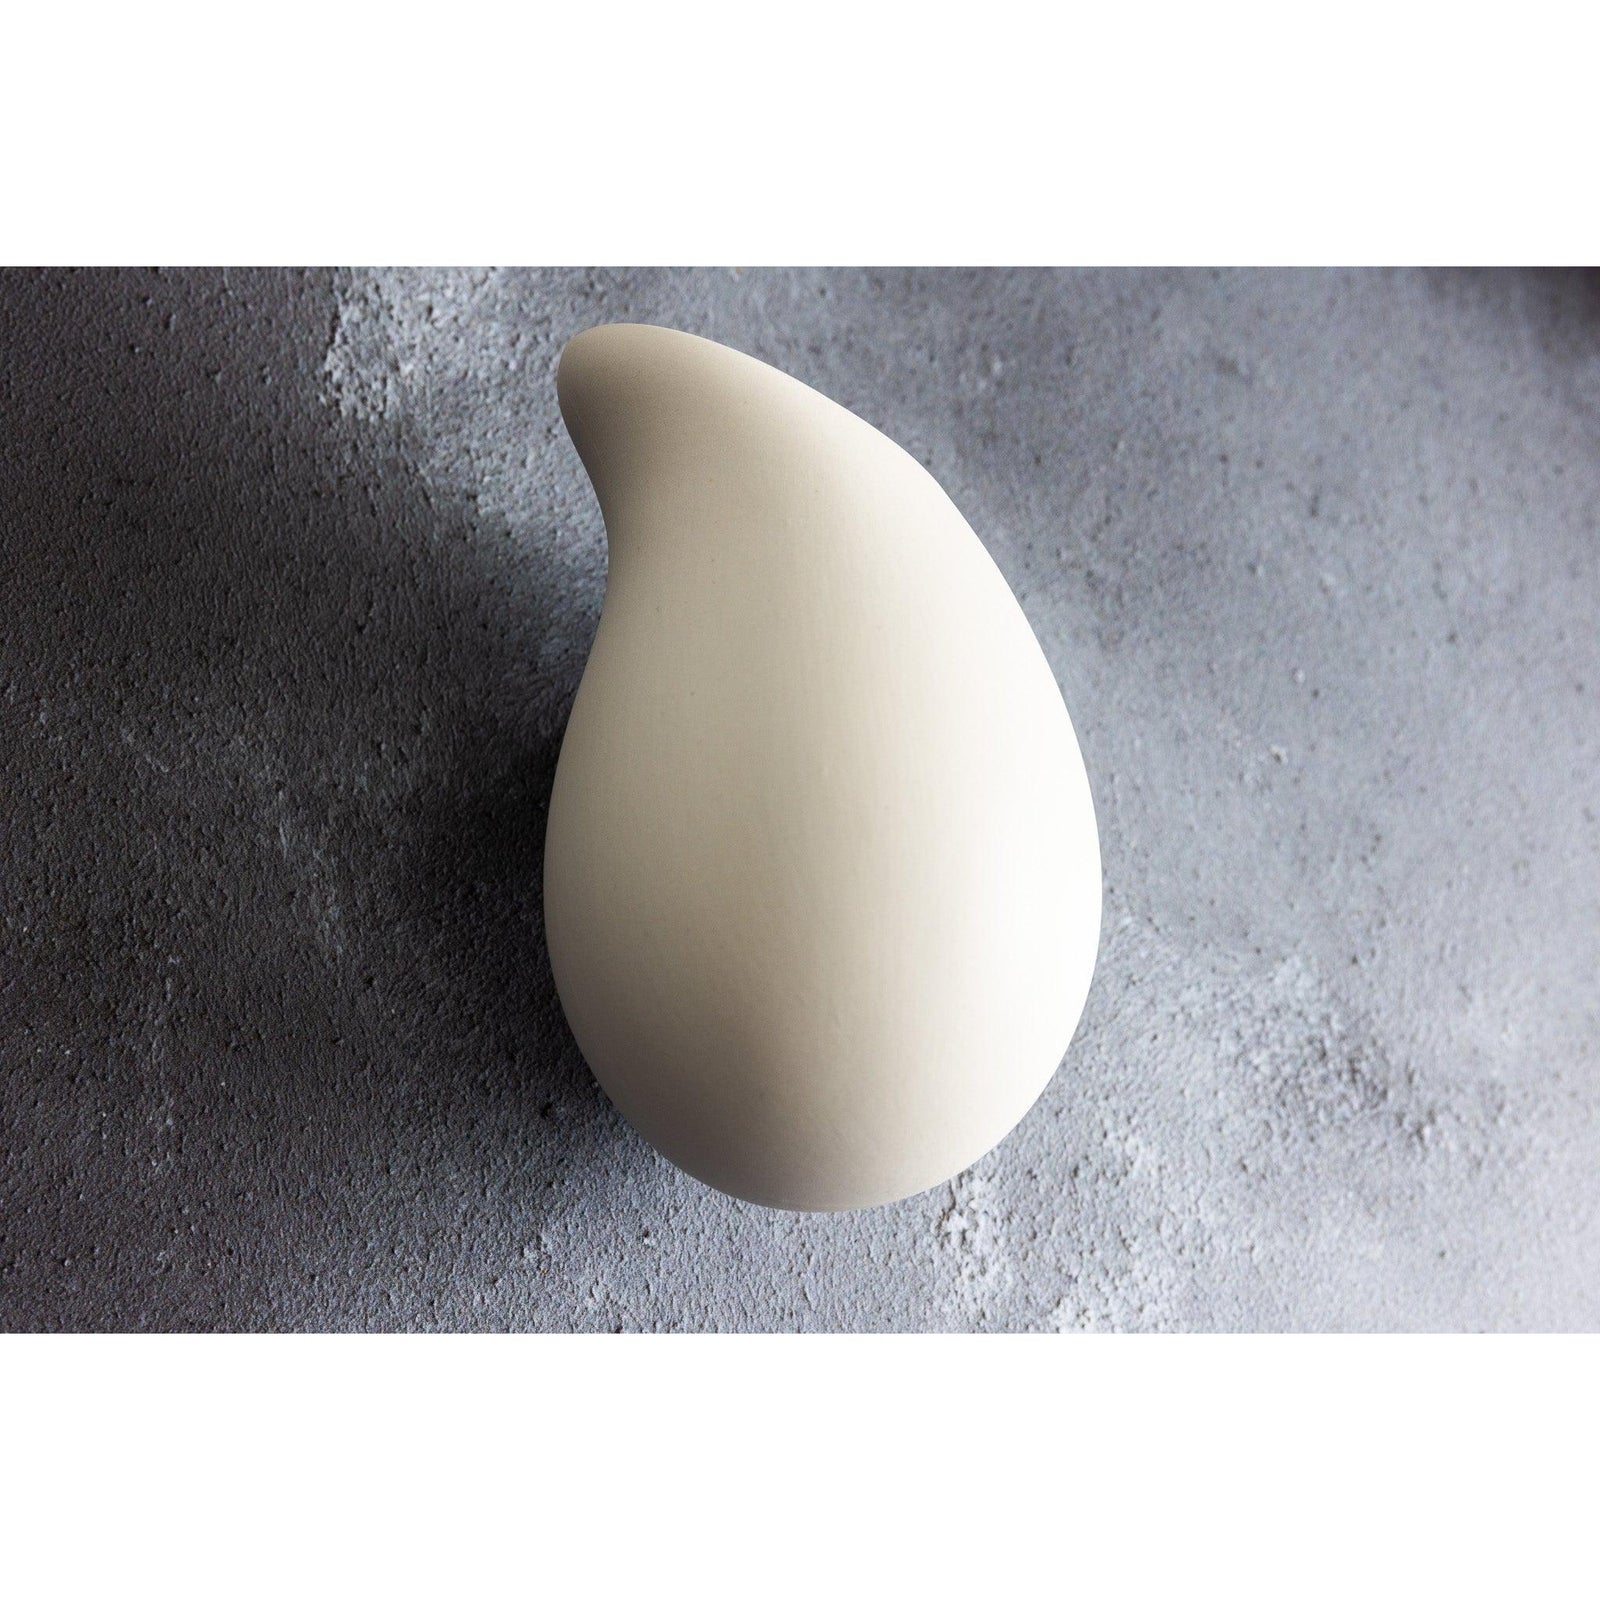 KSP1 Droplet Wall Vase by Kate Schuricht, available at Padstow Gallery, Cornwall